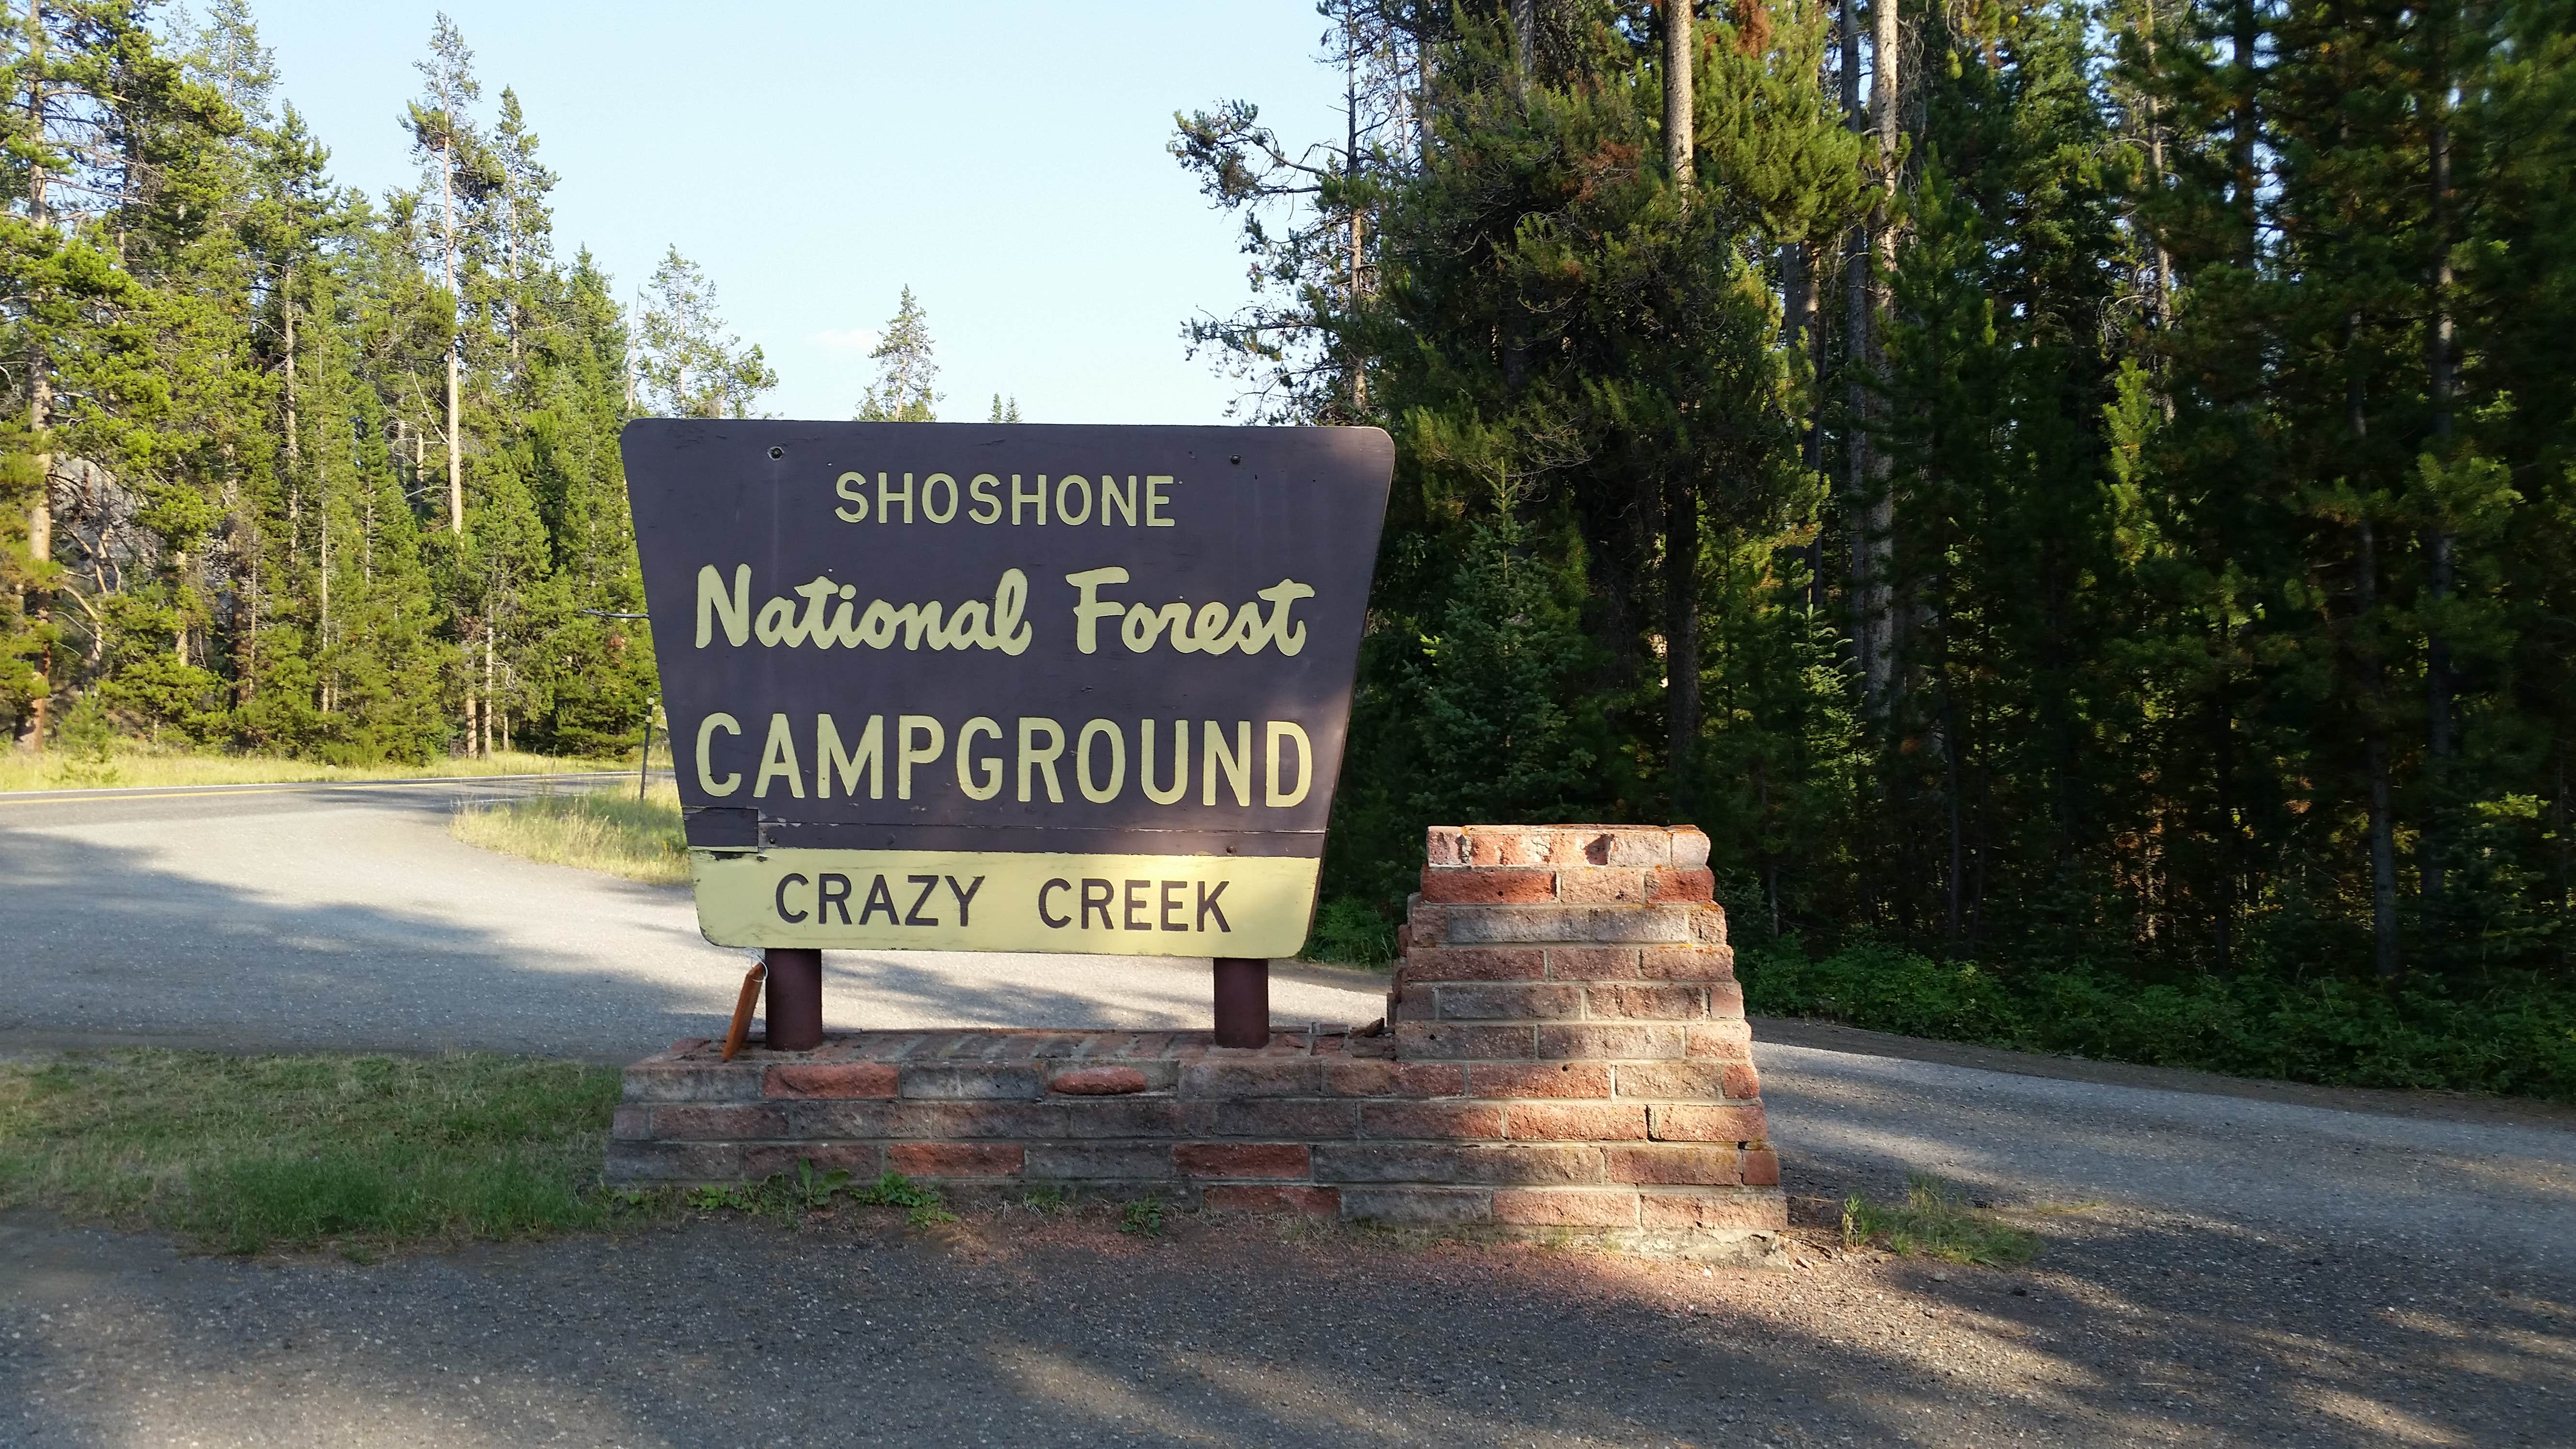 Camper submitted image from Shoshone National Forest Crazy Creek Campground - 1